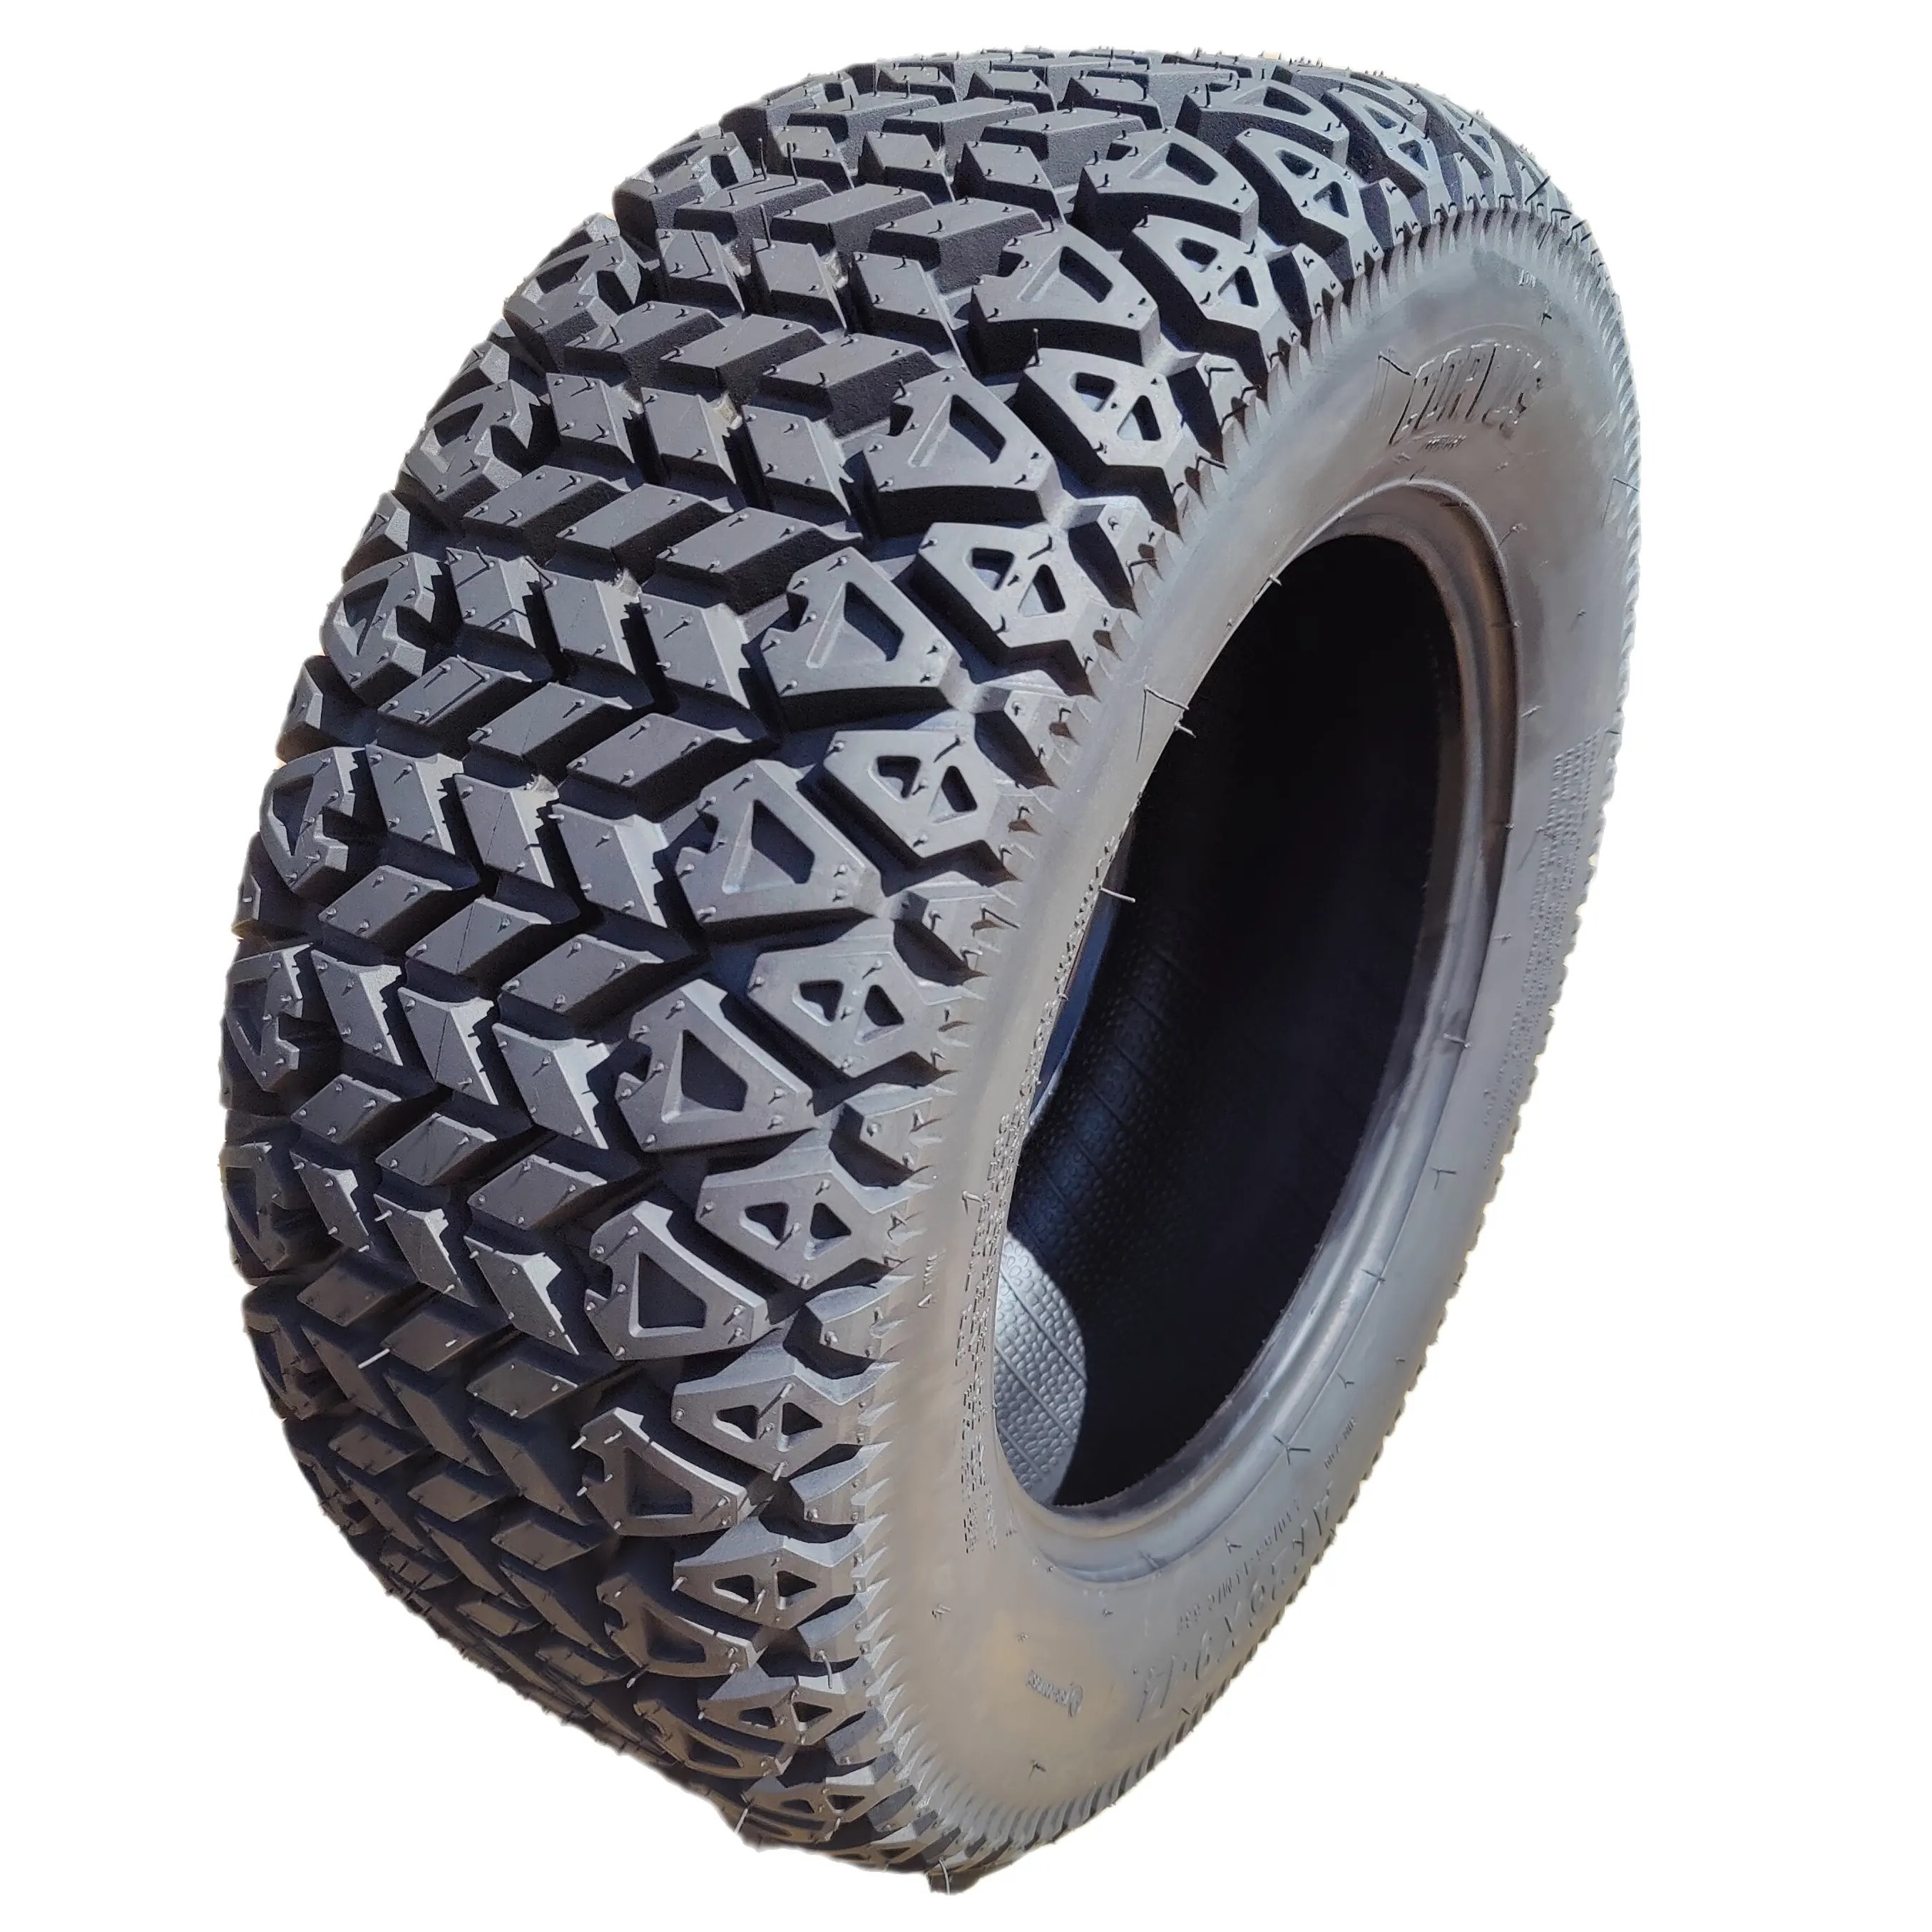 China Utv Tyre Atv Motorcycle Tyre For Off Road Pattern 26x9-14 26x11-14